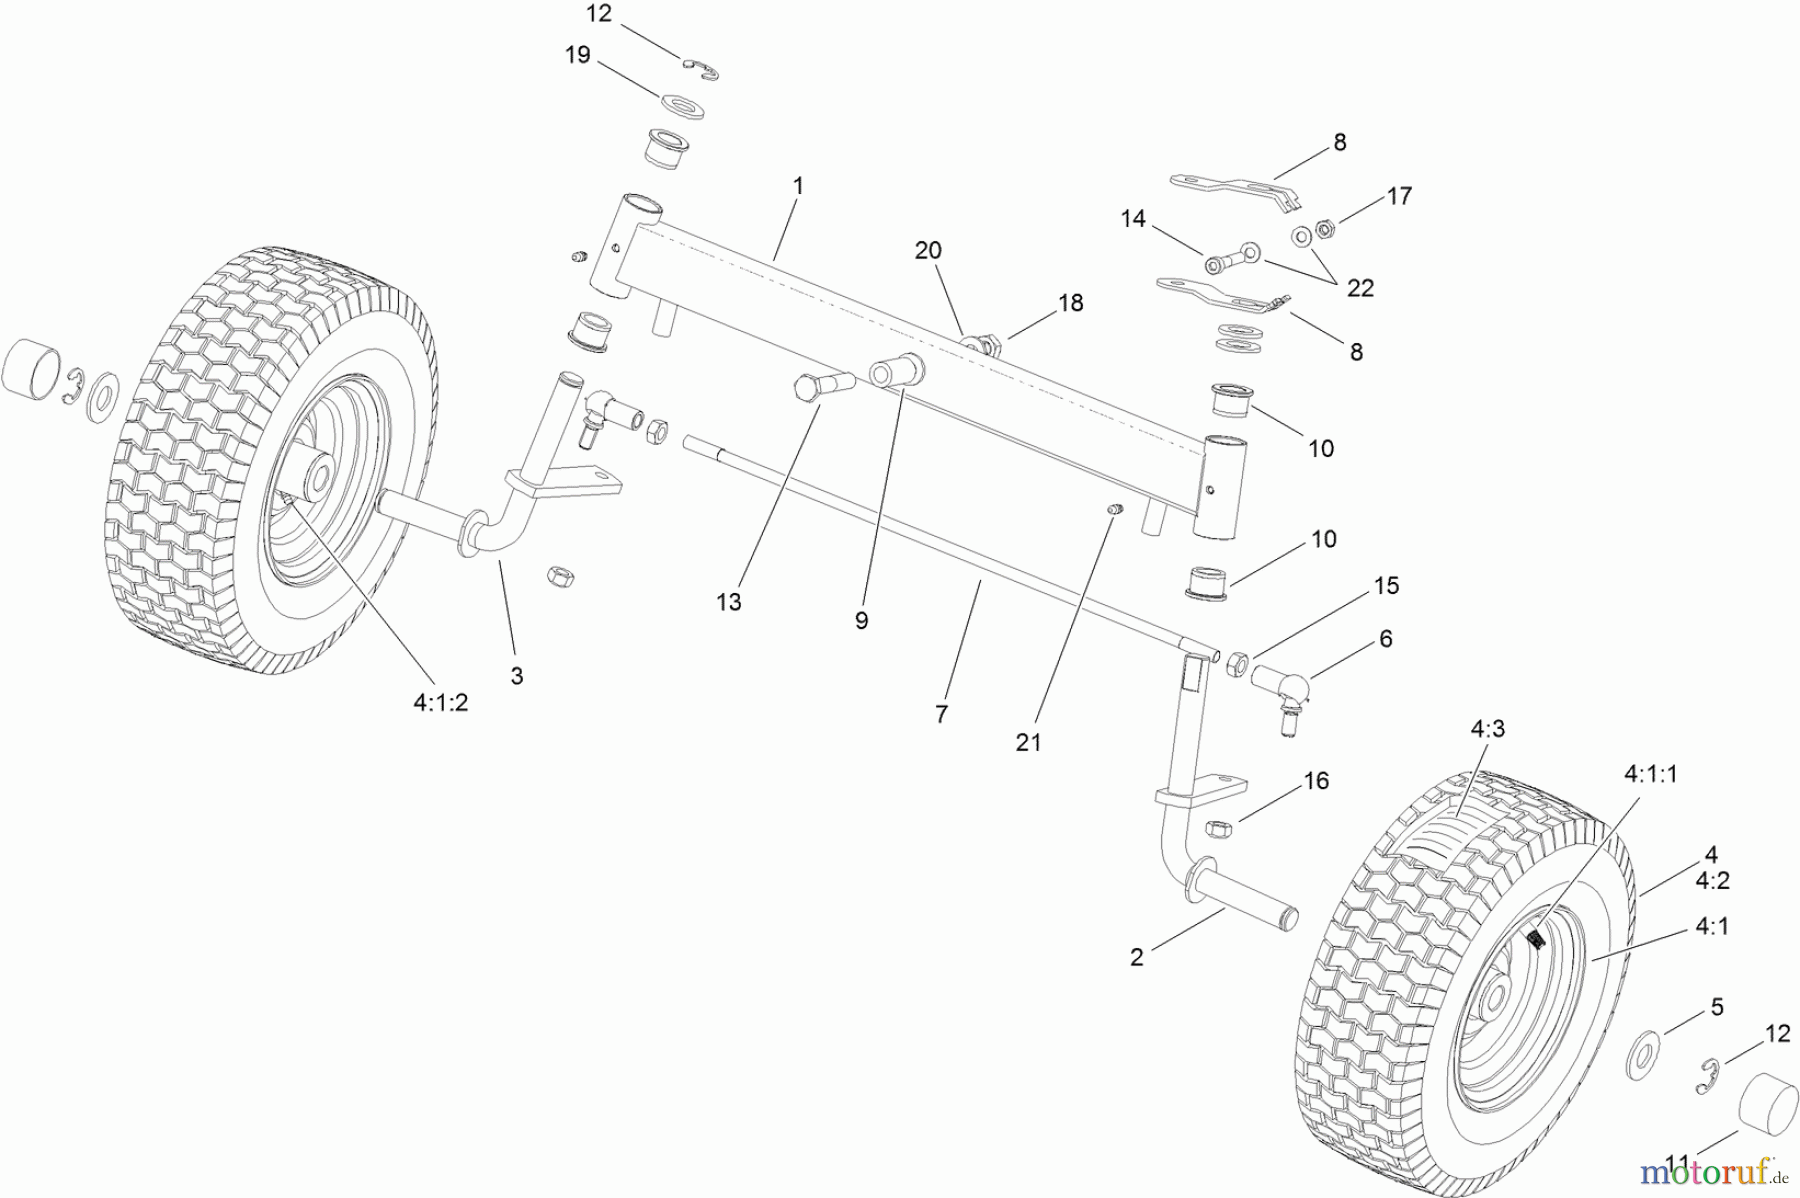  Toro Neu Mowers, Lawn & Garden Tractor Seite 1 74560 (DH 140) - Toro DH 140 Lawn Tractor, 2012 (SN 312000001-312999999) FRONT AXLE ASSEMBLY